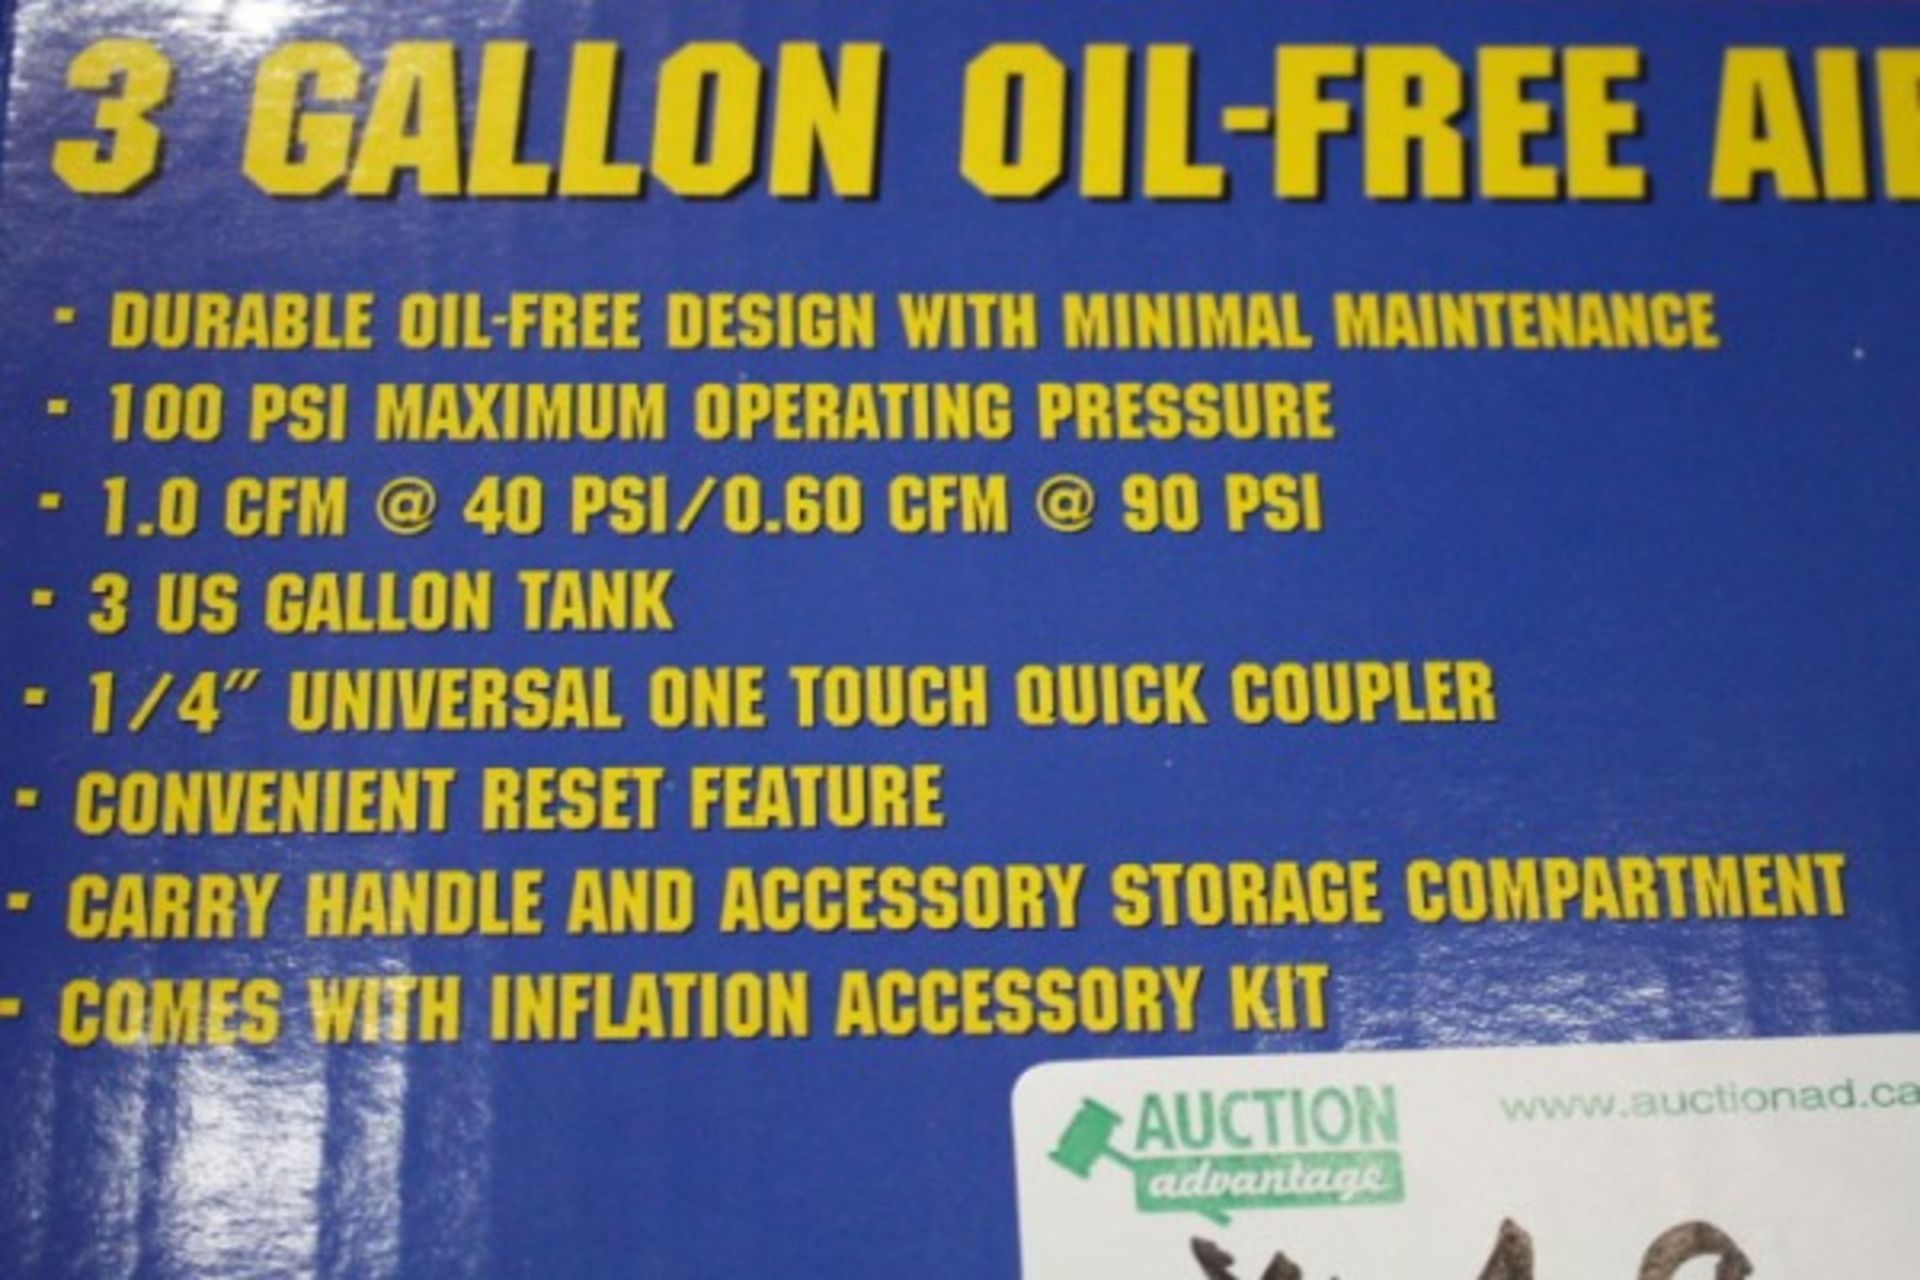 New King Canada 3 Gallon Oil Free Air Compressor Kit M#8438 - Image 3 of 3